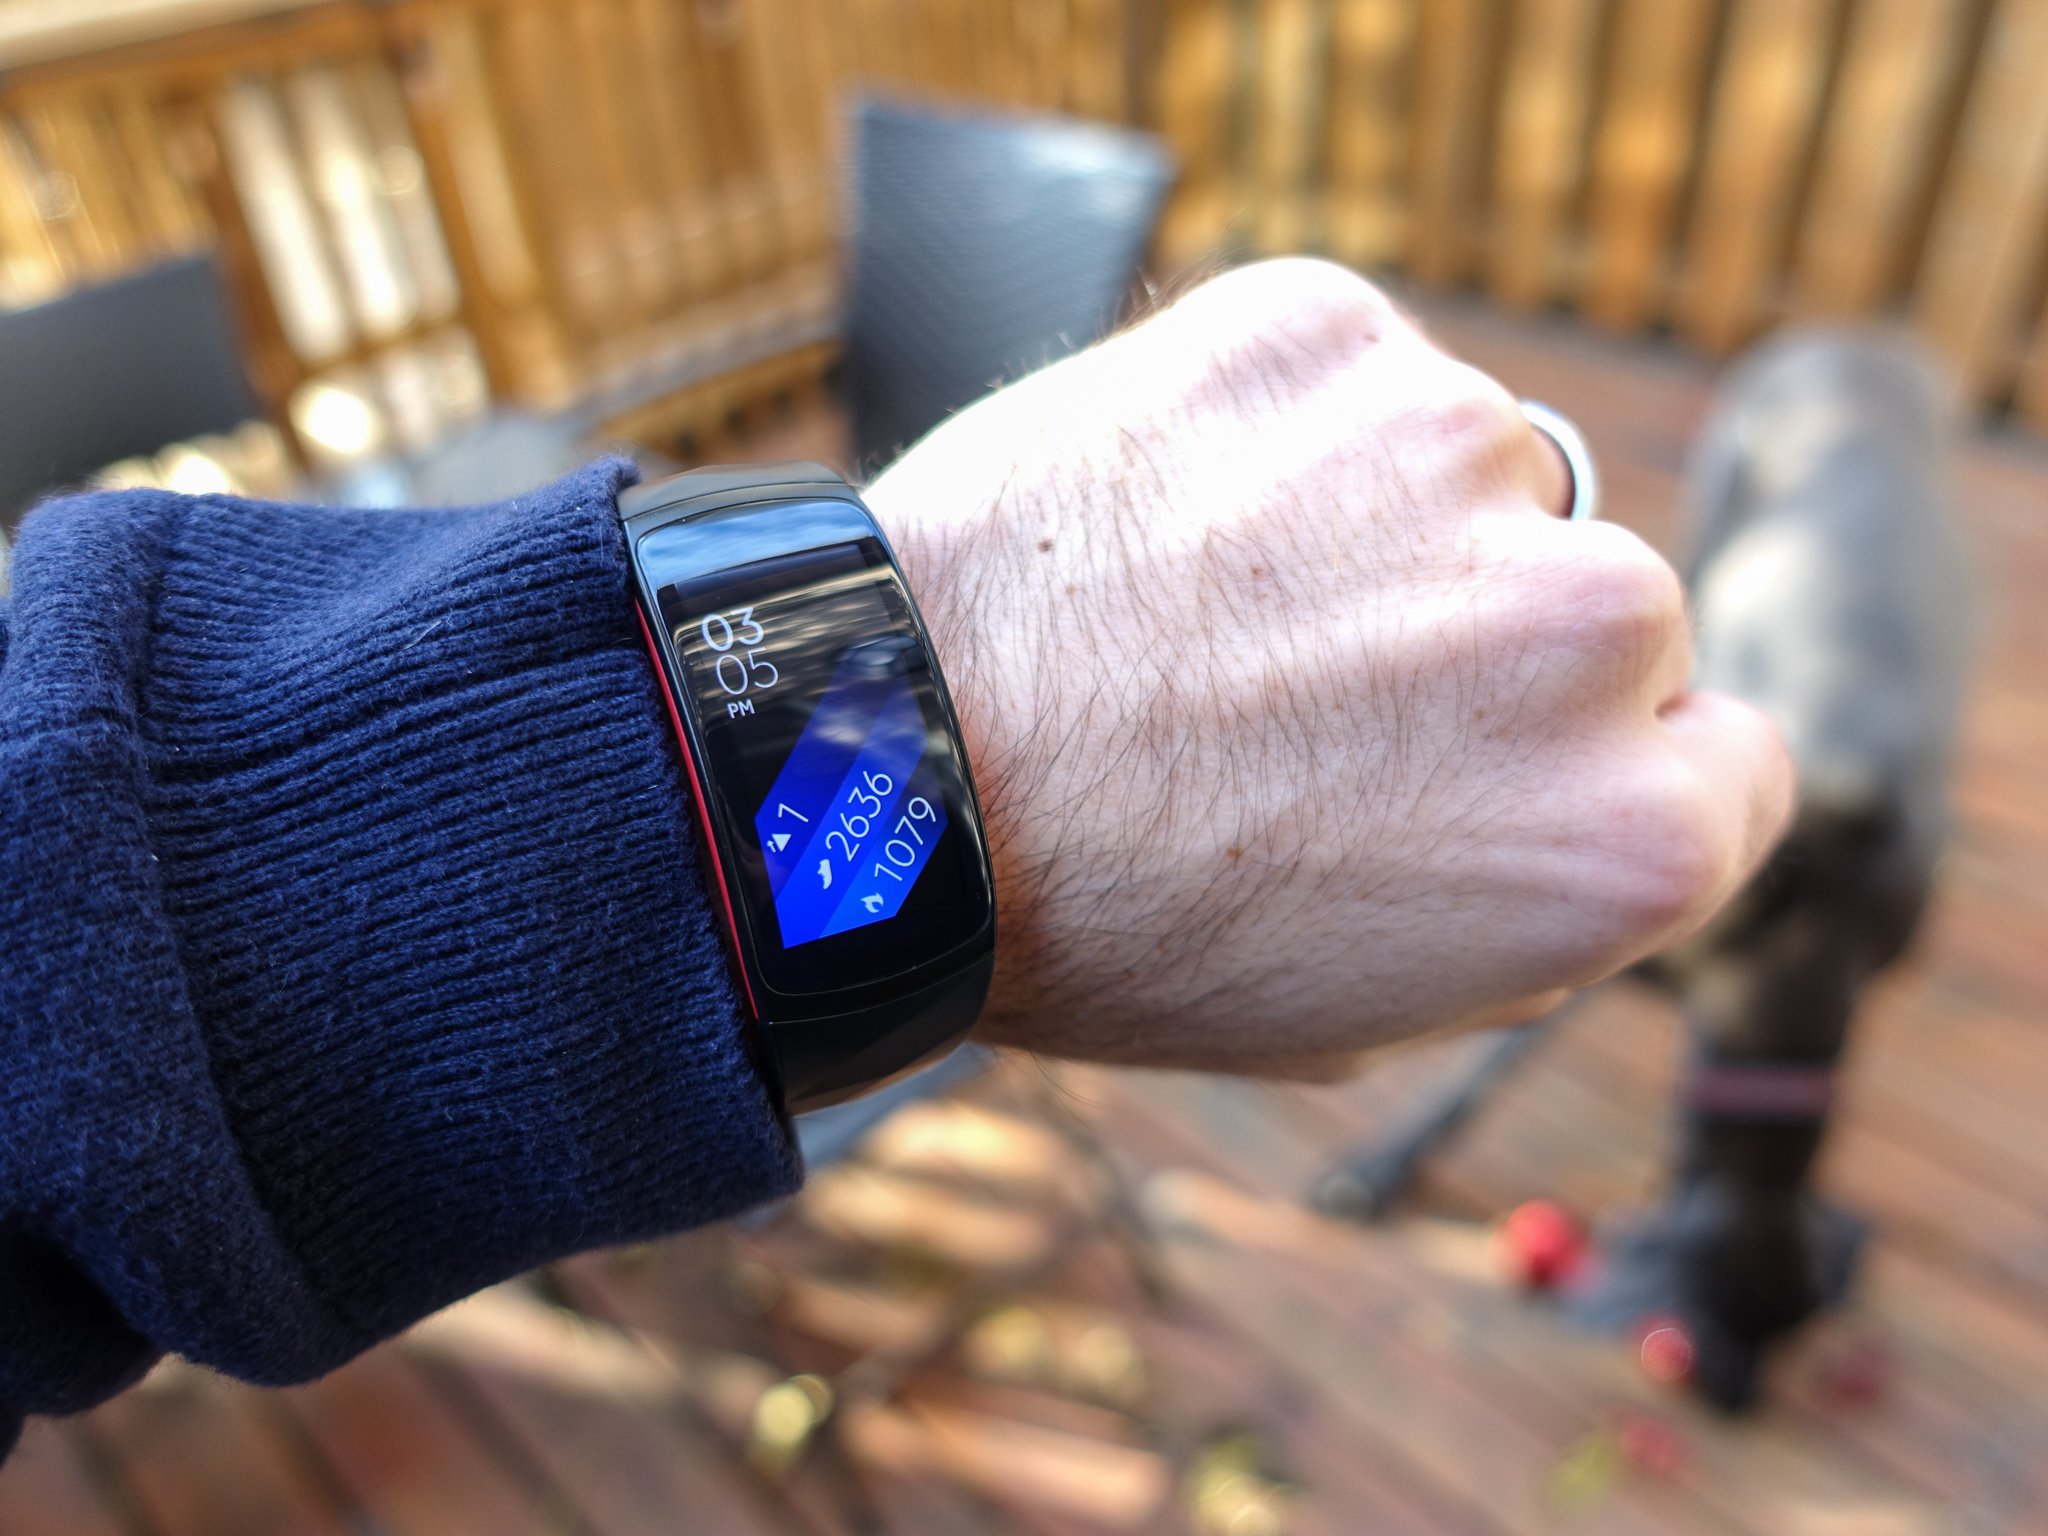 fitbit charge 3 vs samsung gear fit 2